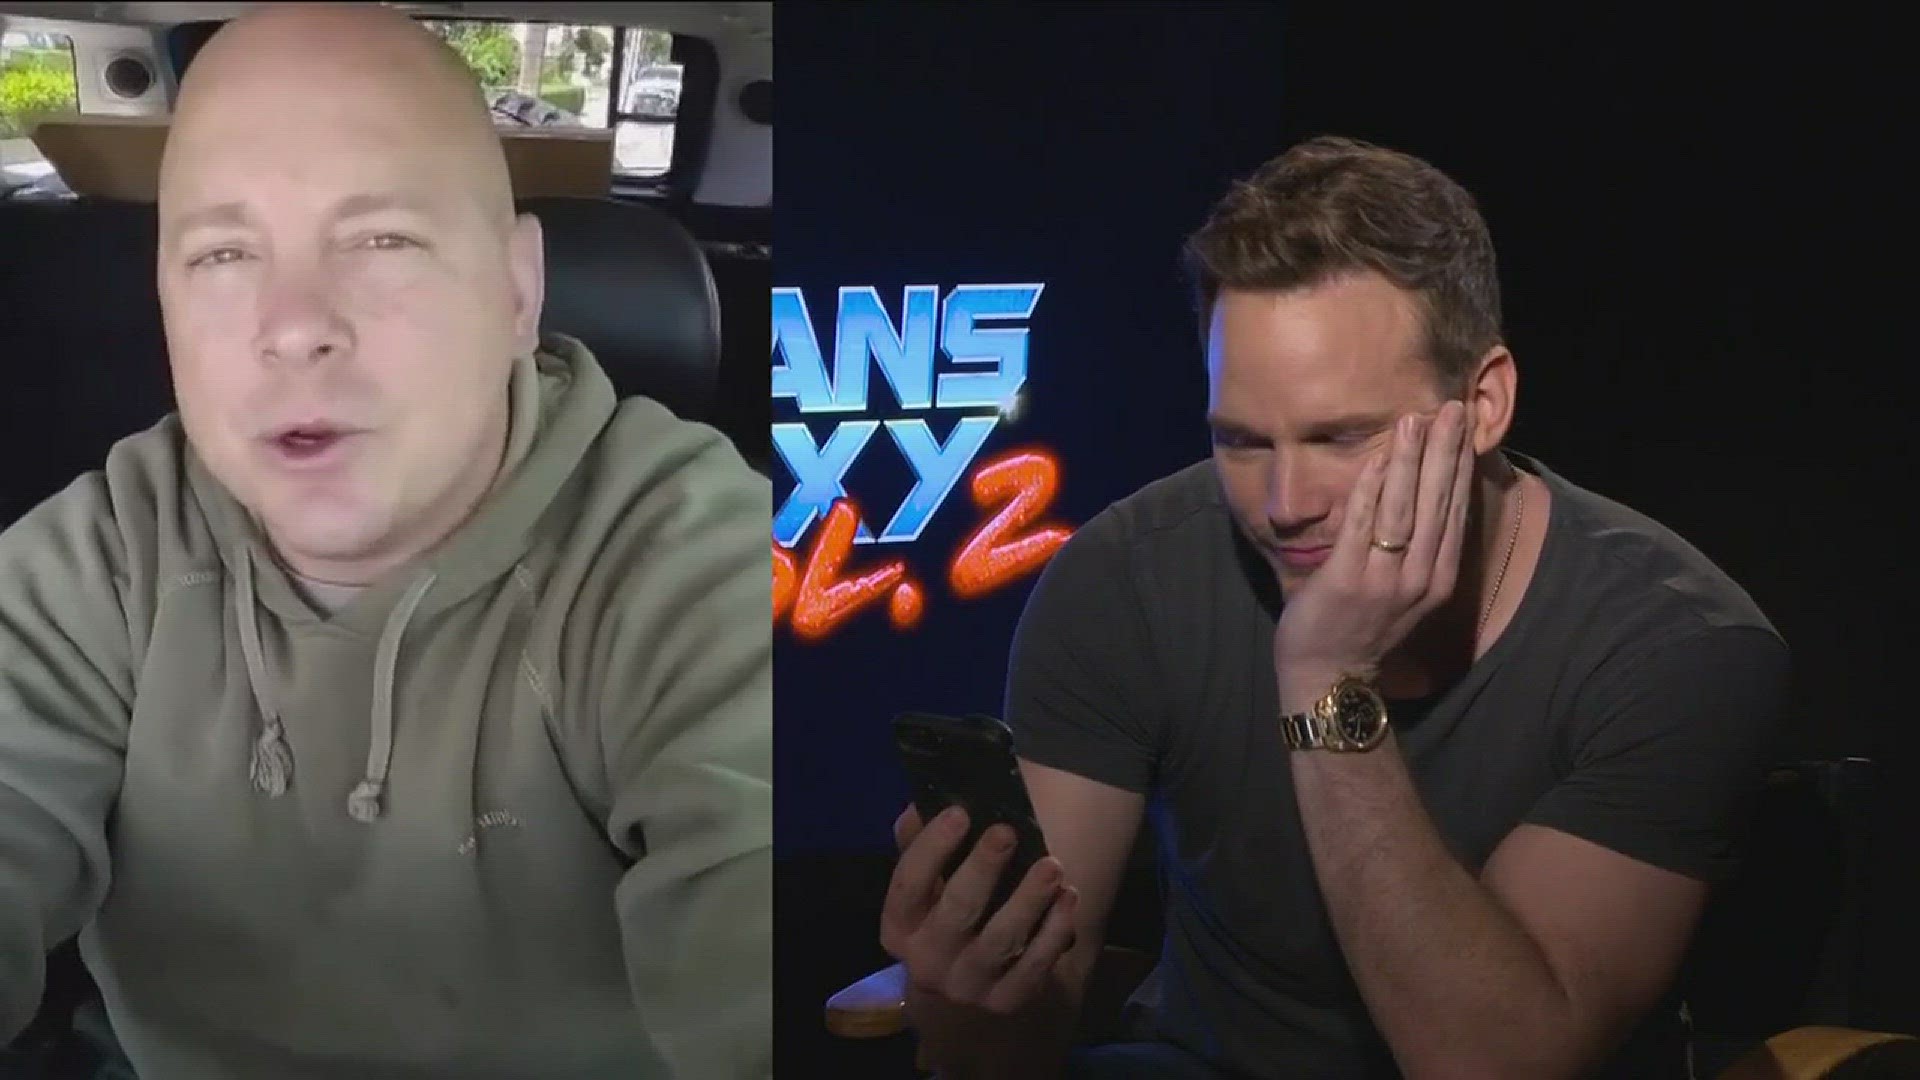 Mark S. Allen surprised Chris Pratt with a video question from his brother. (Travel and accommodation costs paid by Walt Disney Studios Motion Pictures)